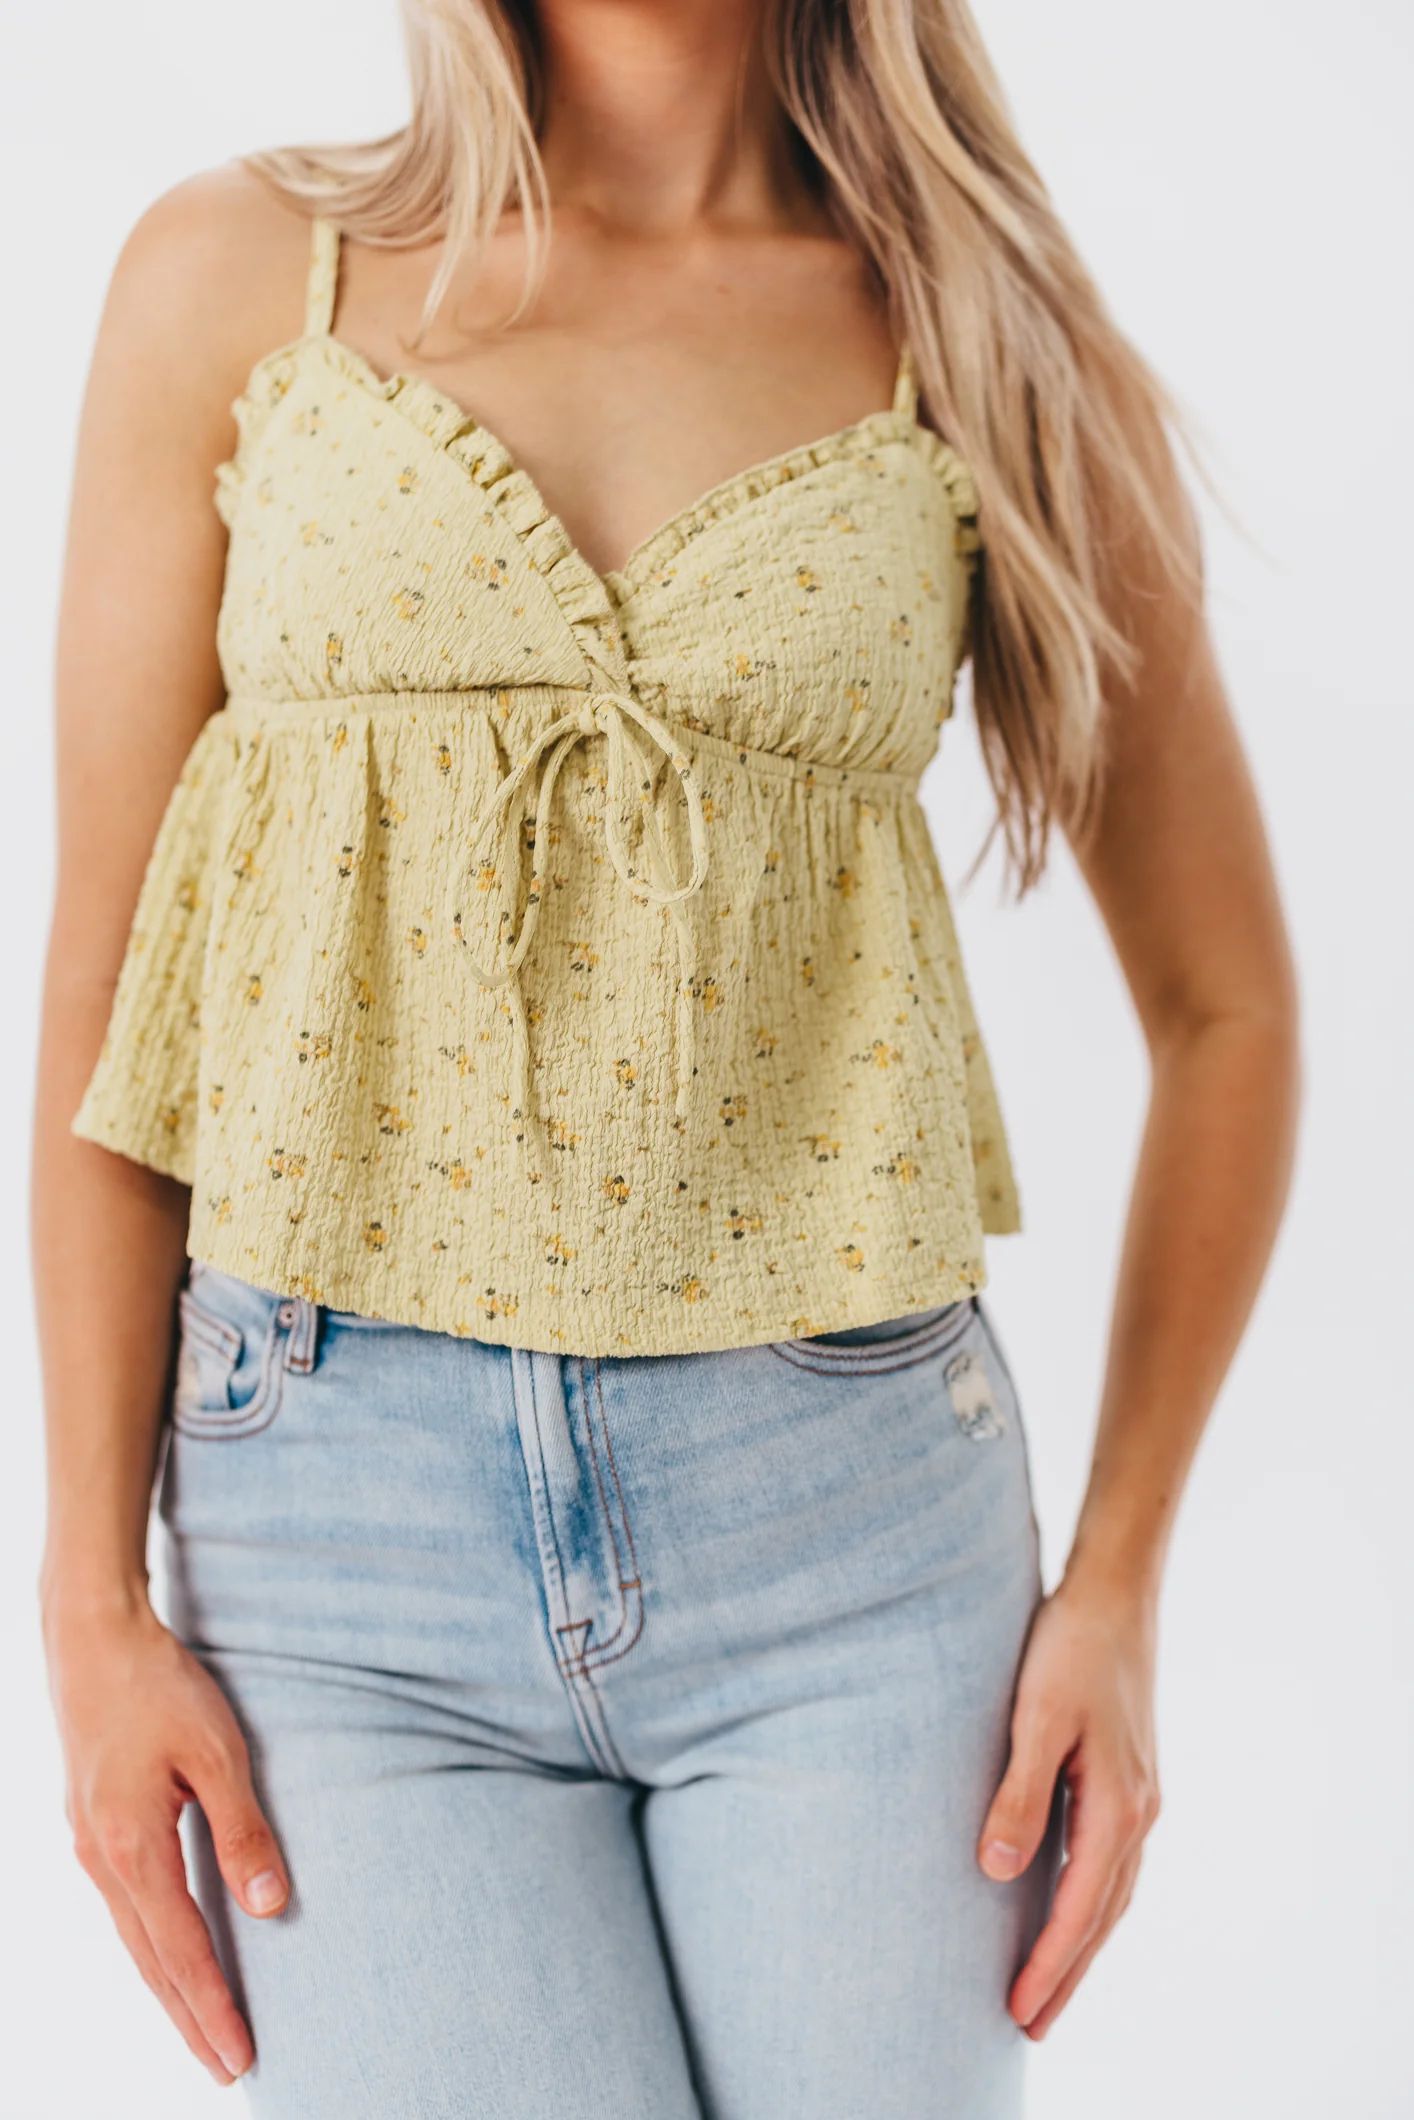 Ciara Crinkle Ruffled Cami Top in Avocado Floral | Worth Collective